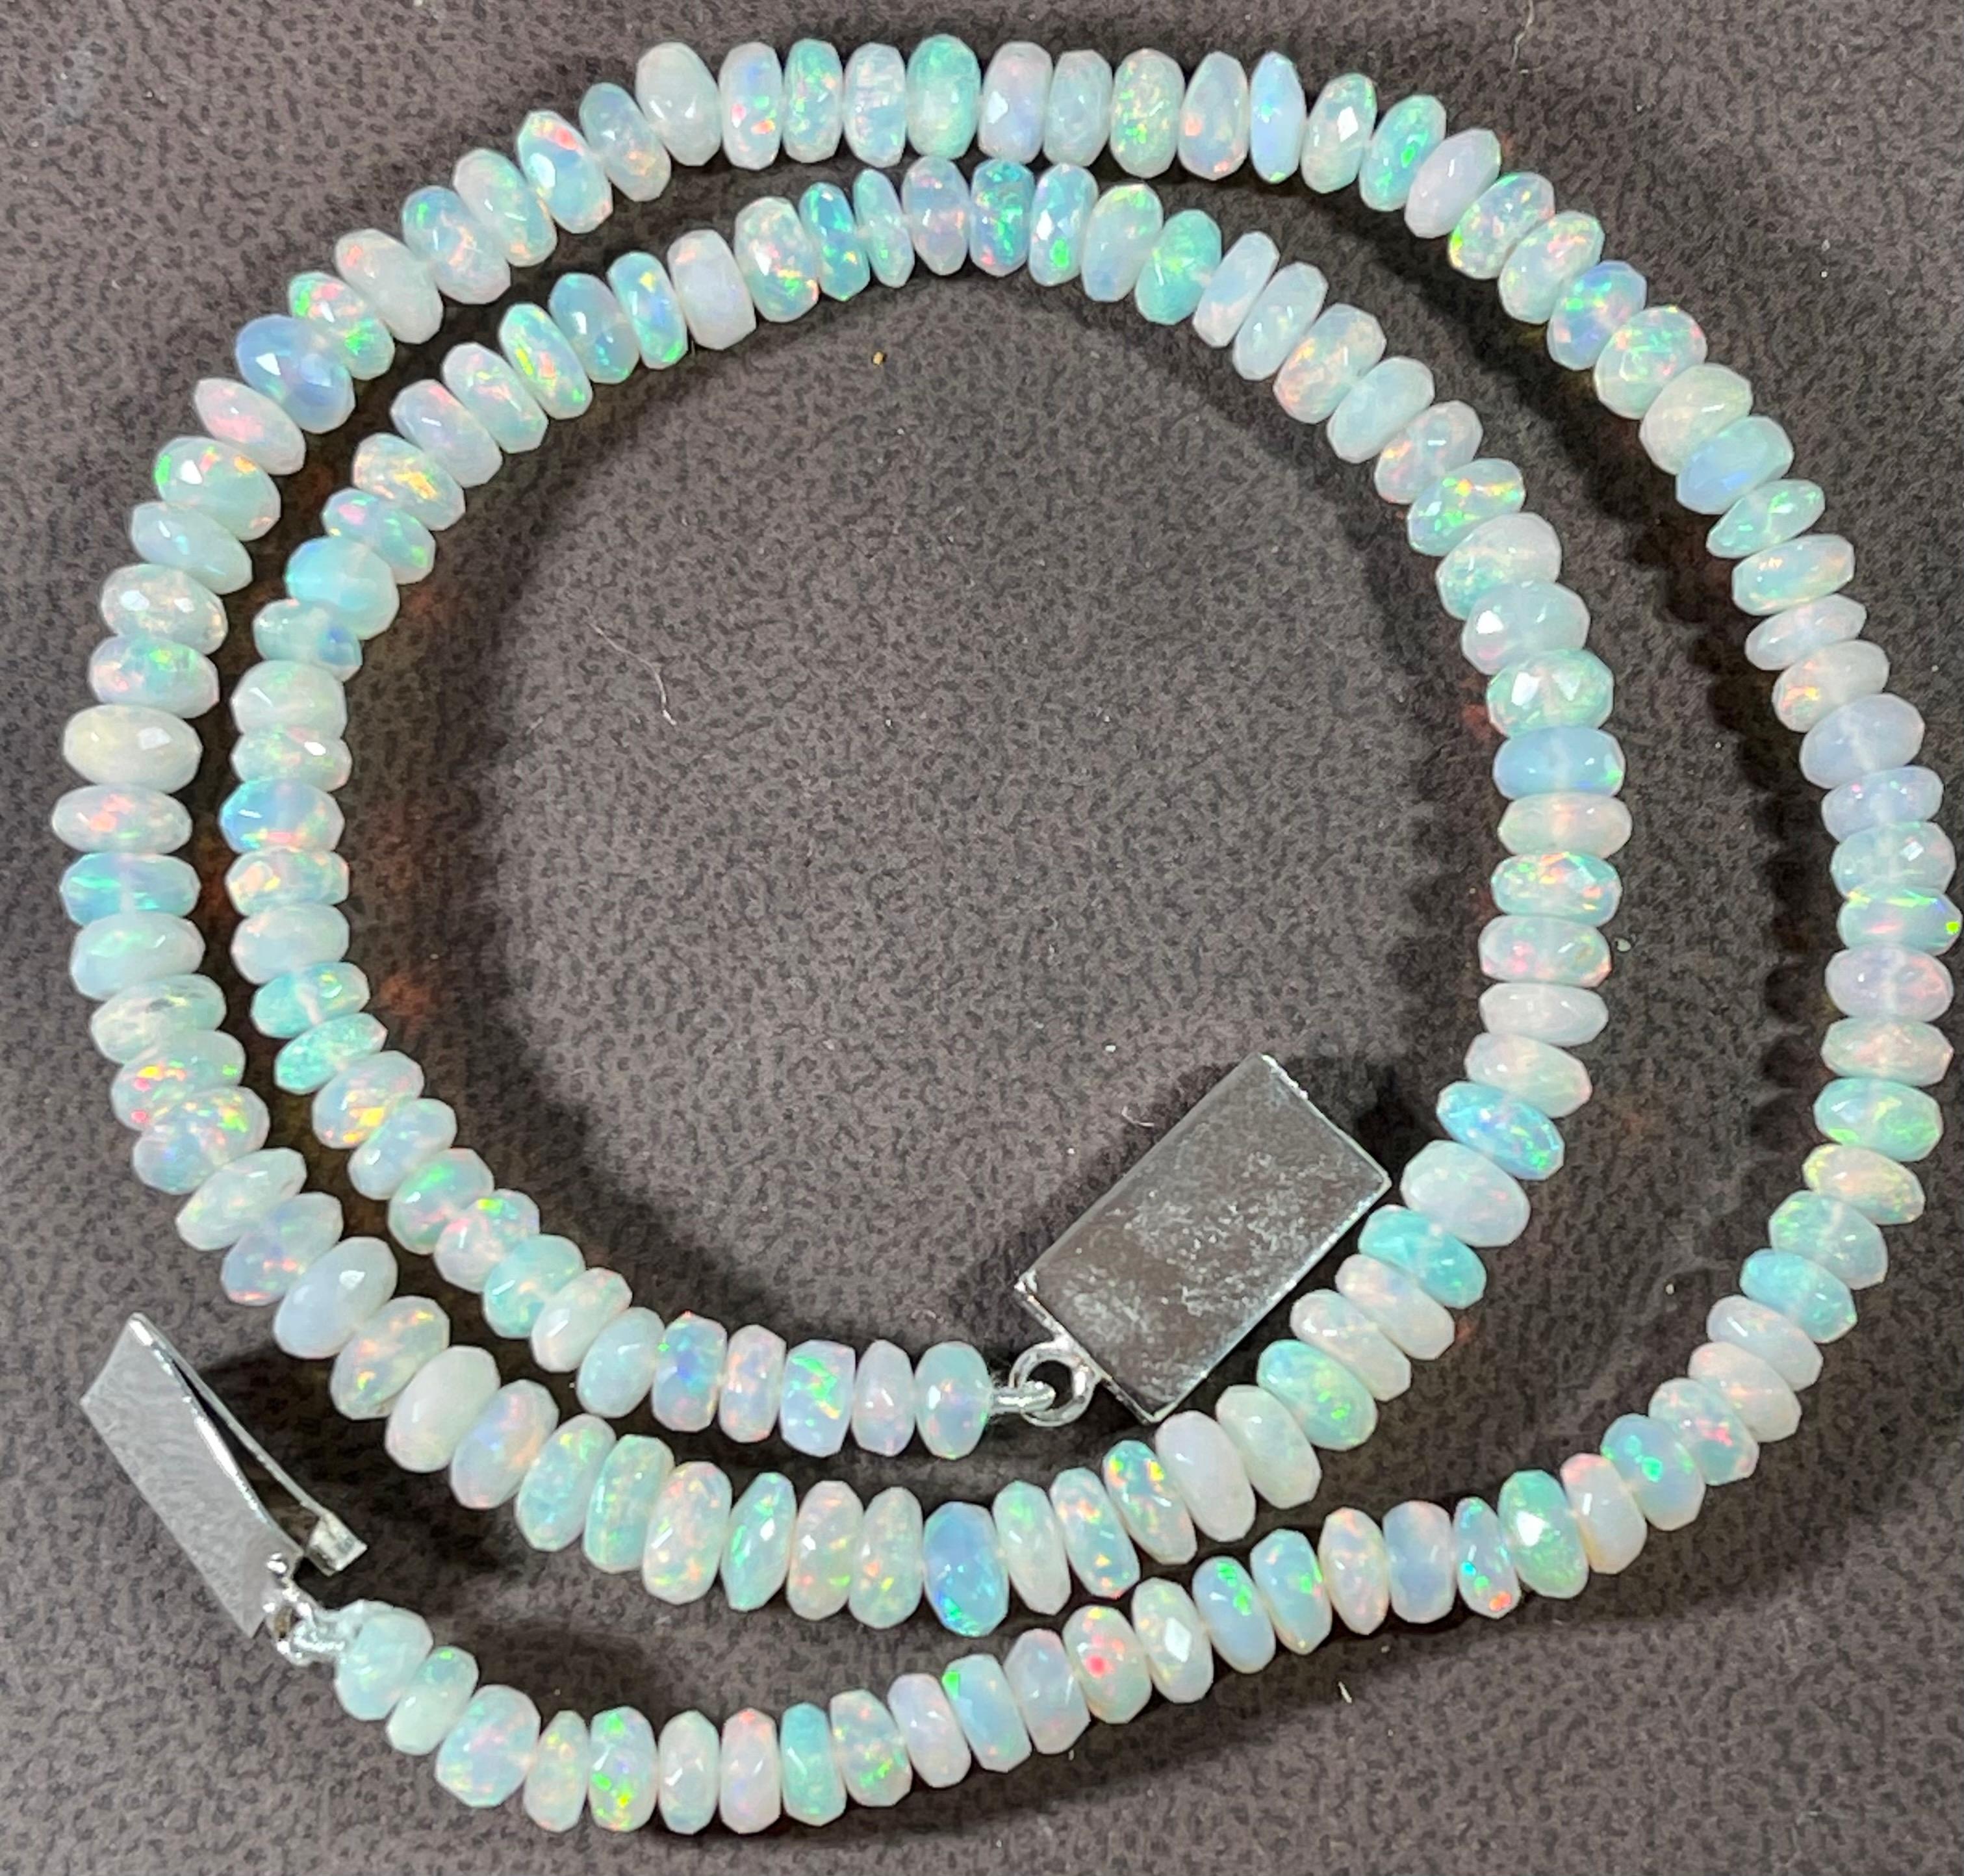  
A great gift item 
Natural Opal single strand Bead Necklace with Silver Clasp 
16